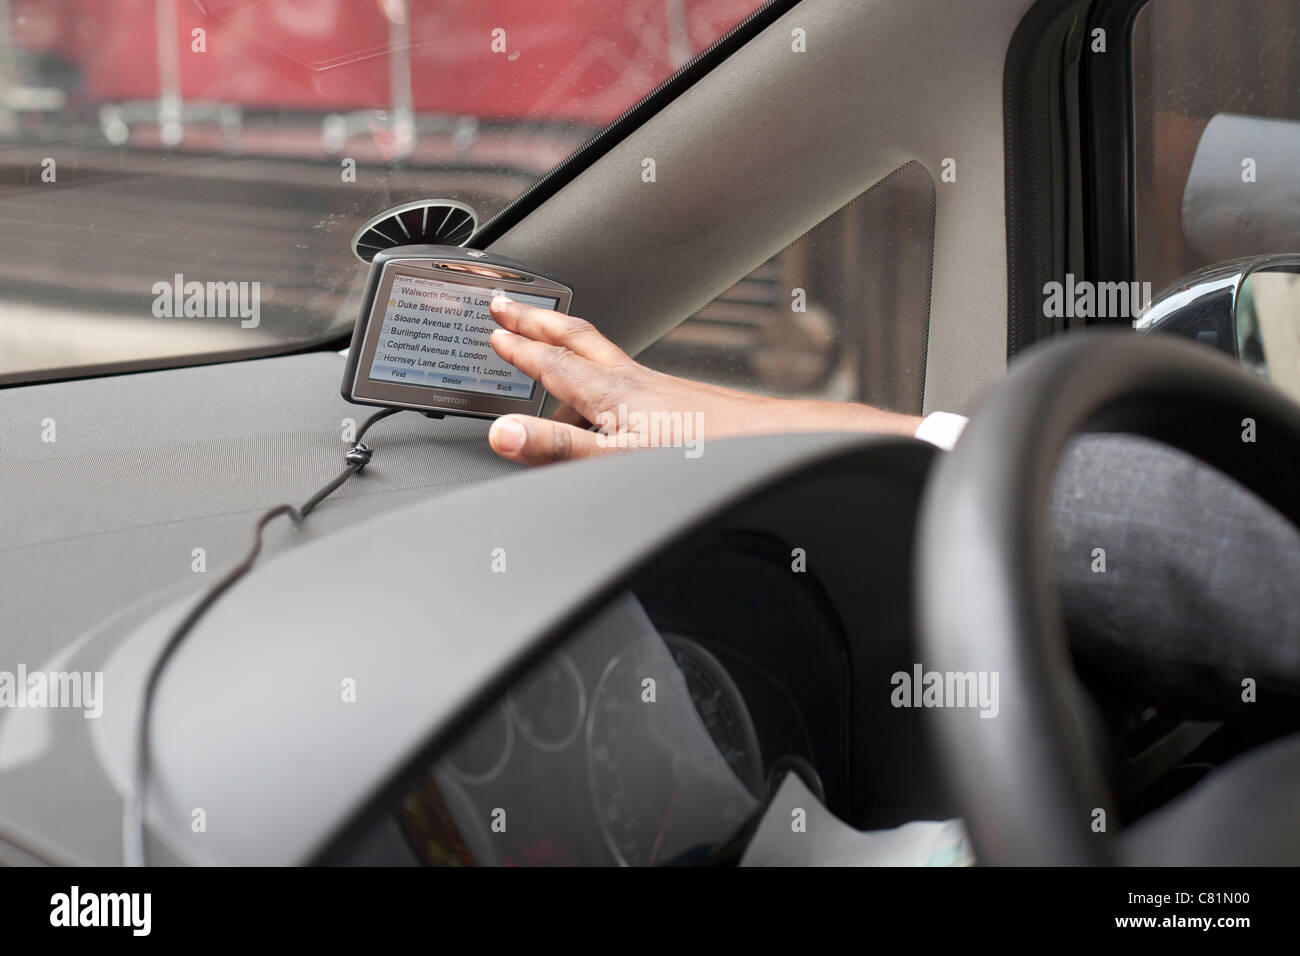 Male driver setting up a tomtom satnav in his car Stock Photo